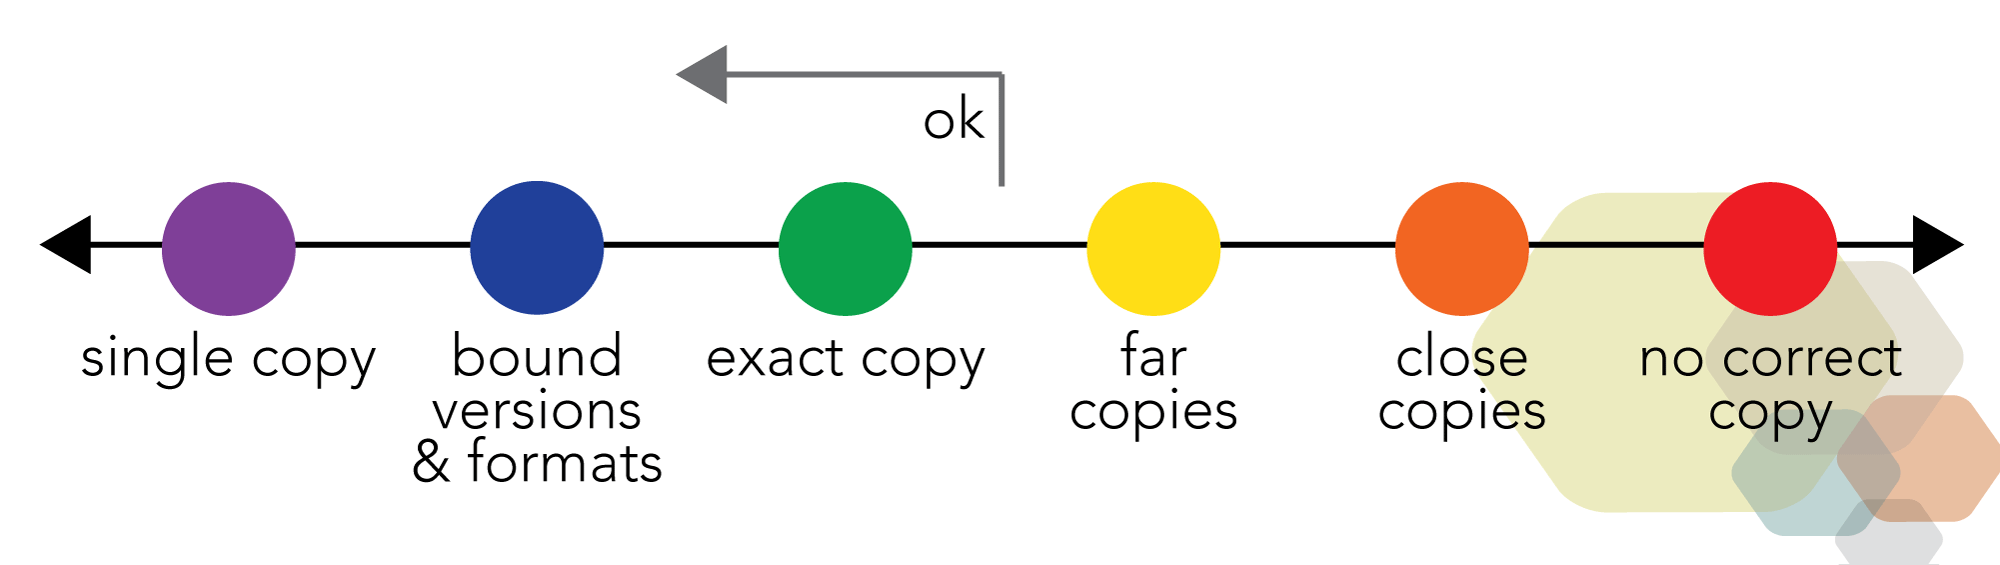 Minimize the number of copies and contextualize any that remain.